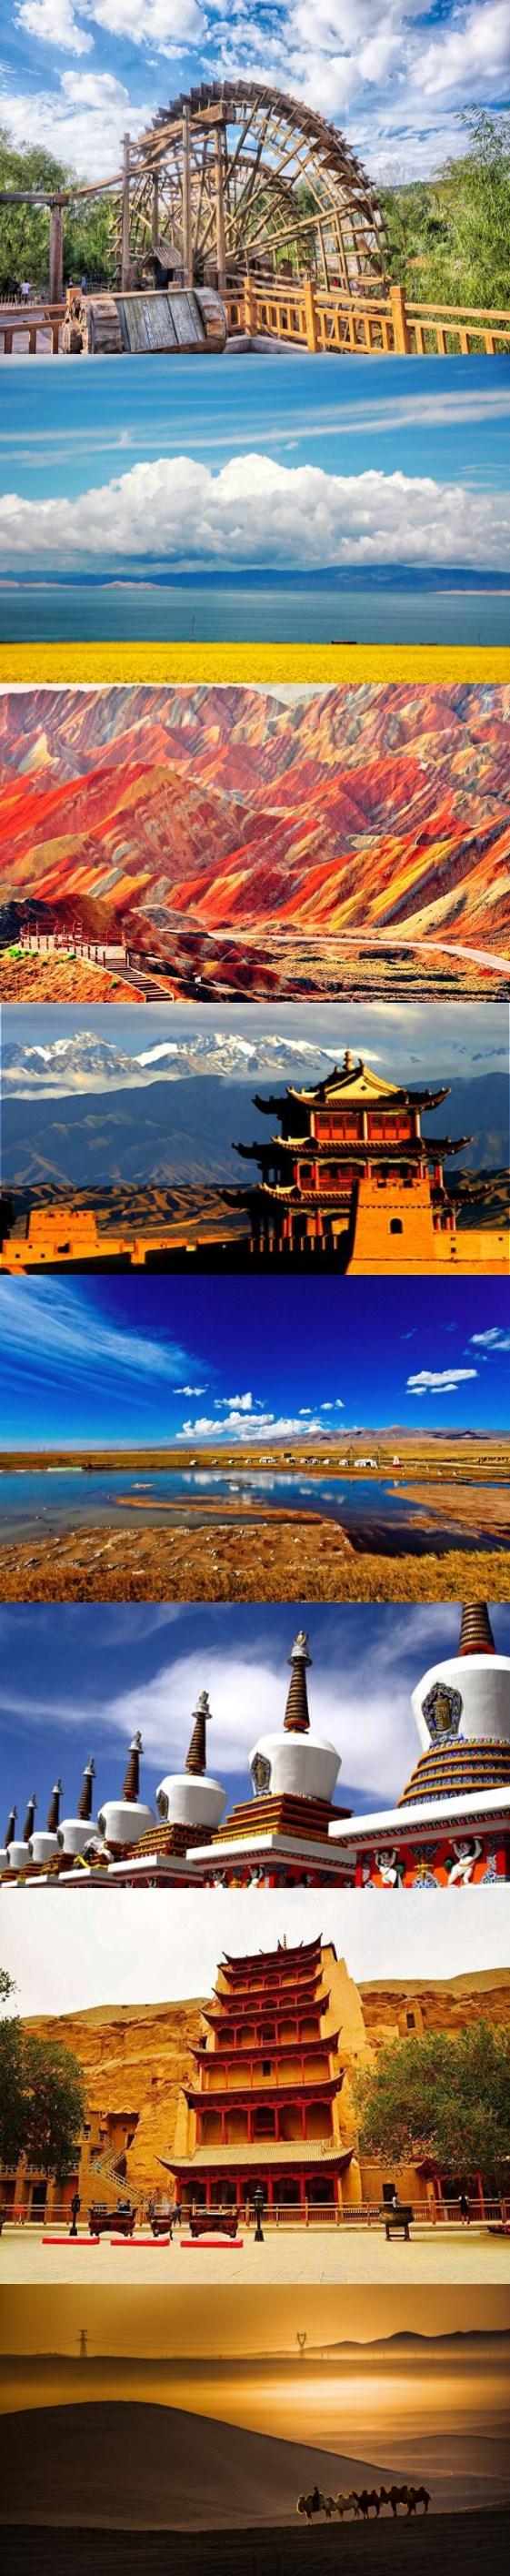 Itinerary Aug 5: Arrival in Lanzhou Aug 6: Welcome, campus tour and course 1 Aug 7: Course 2 and company visit Aug 8: Course 3 and cultural excursion Aug 9: Course 4 and visit industrial park Aug 10: